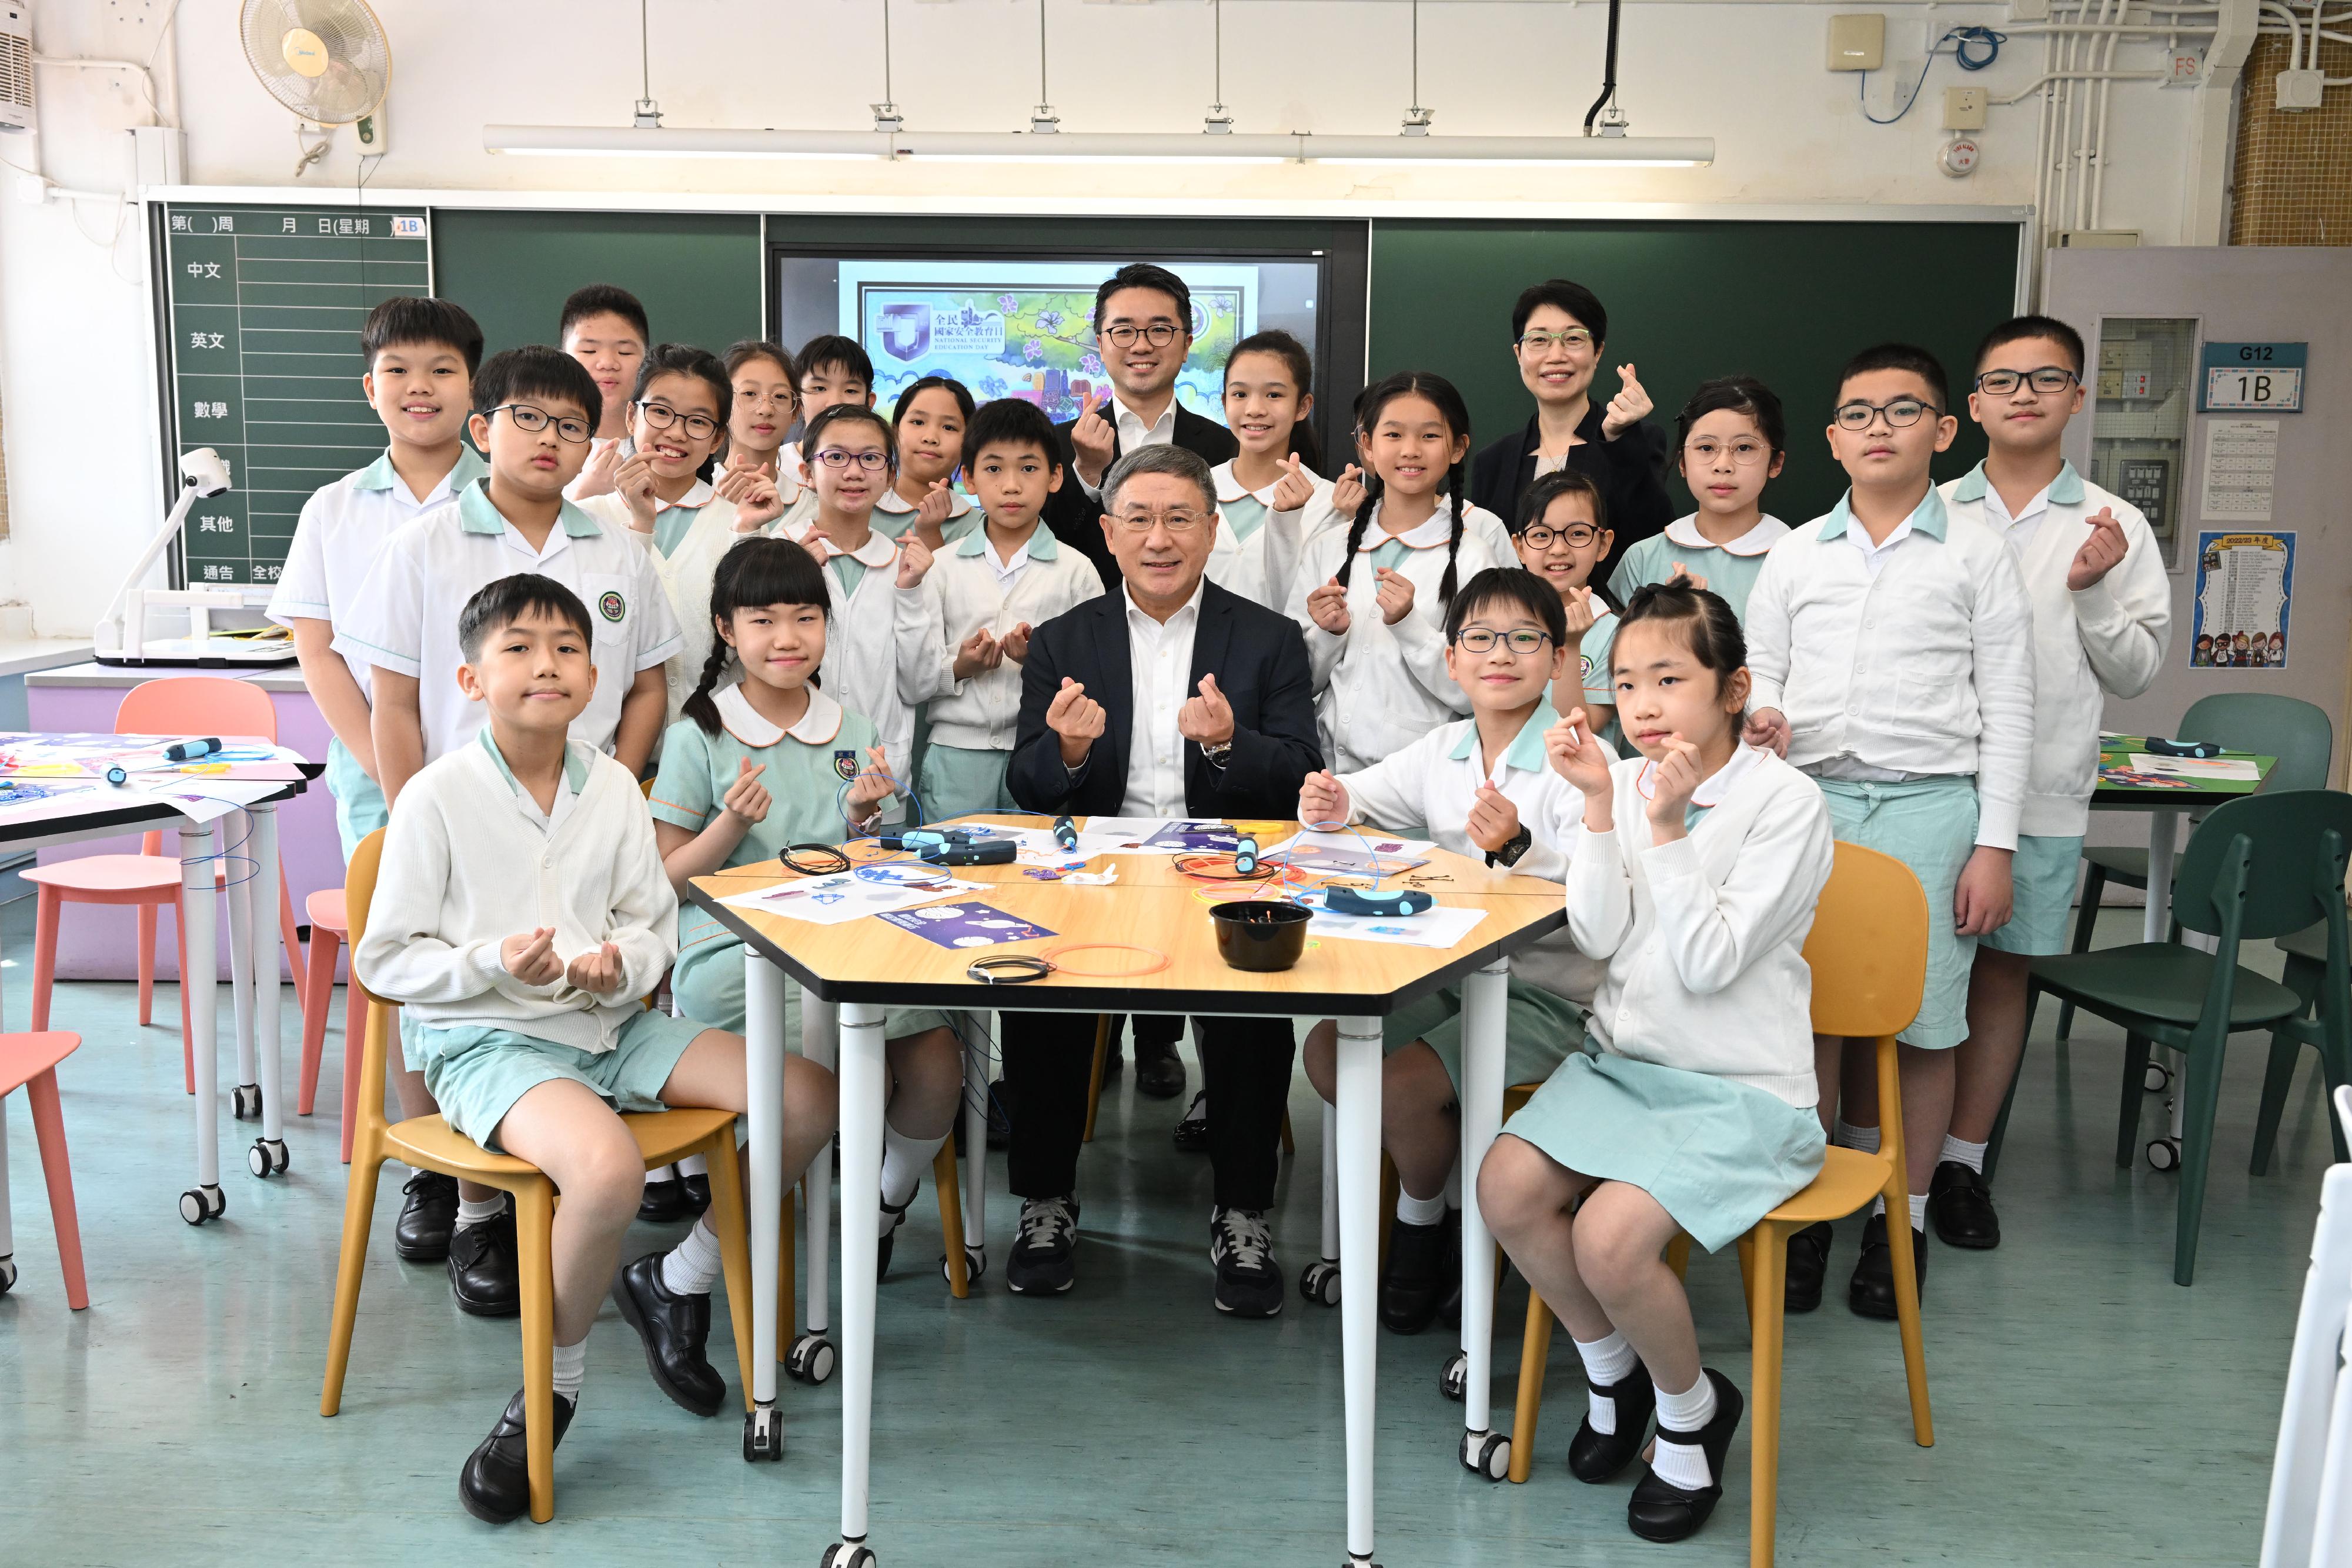 The Deputy Chief Secretary for Administration, Mr Cheuk Wing-hing (front row, centre), and the Acting Secretary for Education, Mr Sze Chun-fai (back row, centre), join a group photo with the students and the school principal of Shatin Government Primary School, Ms Ellen Wong (back row, fourth right), after visiting a workshop on 3D printing today (April 13).